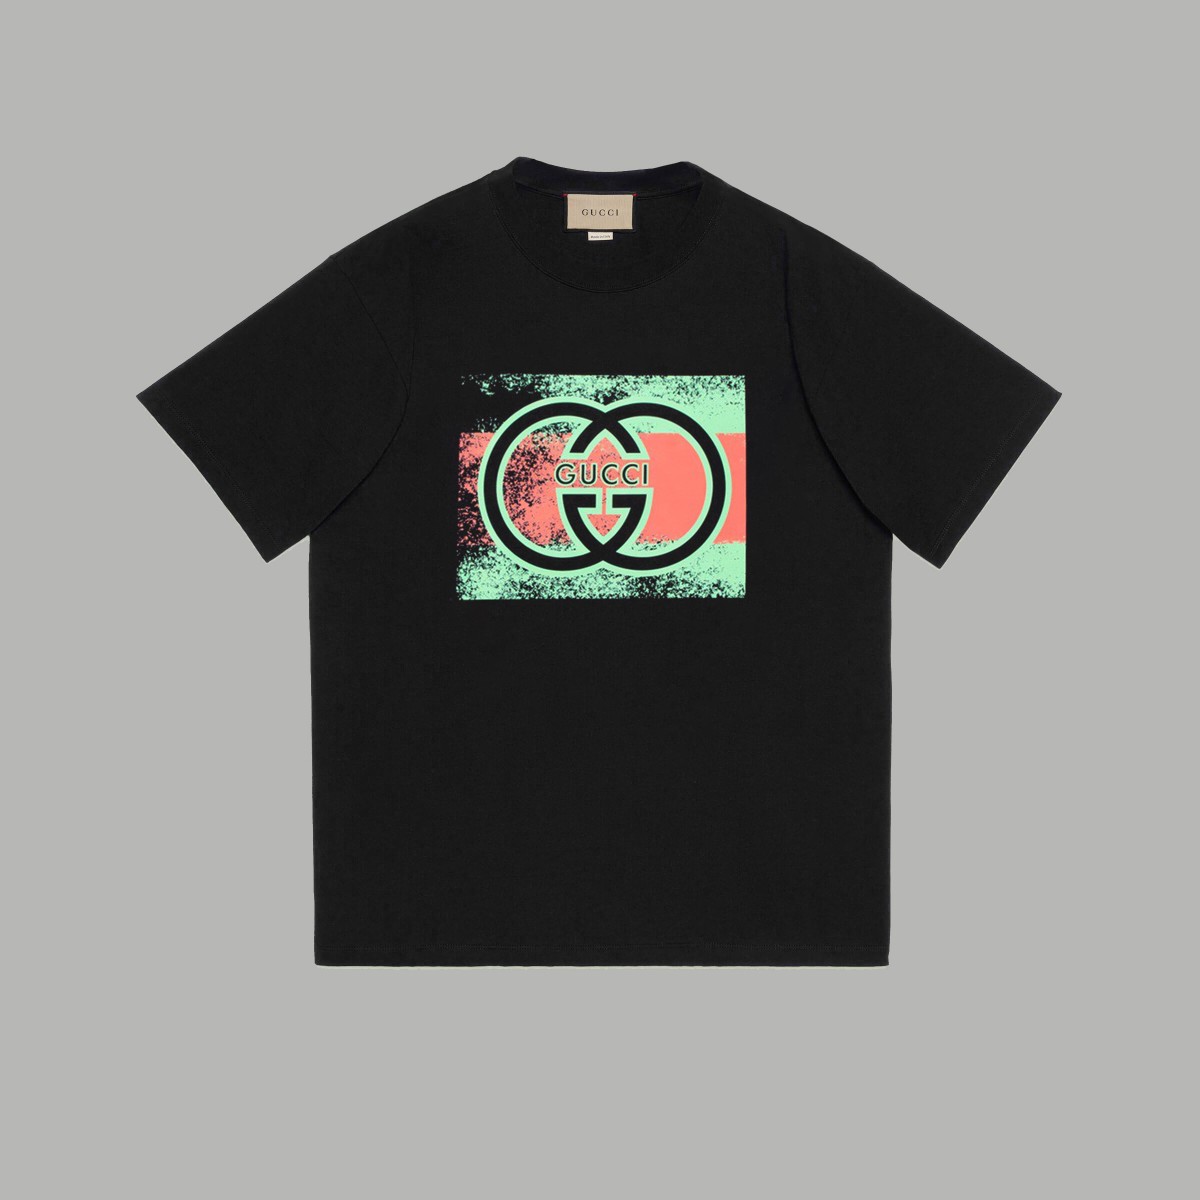 Gucci Clothing T-Shirt website to buy replica
 Printing Unisex Cotton Short Sleeve